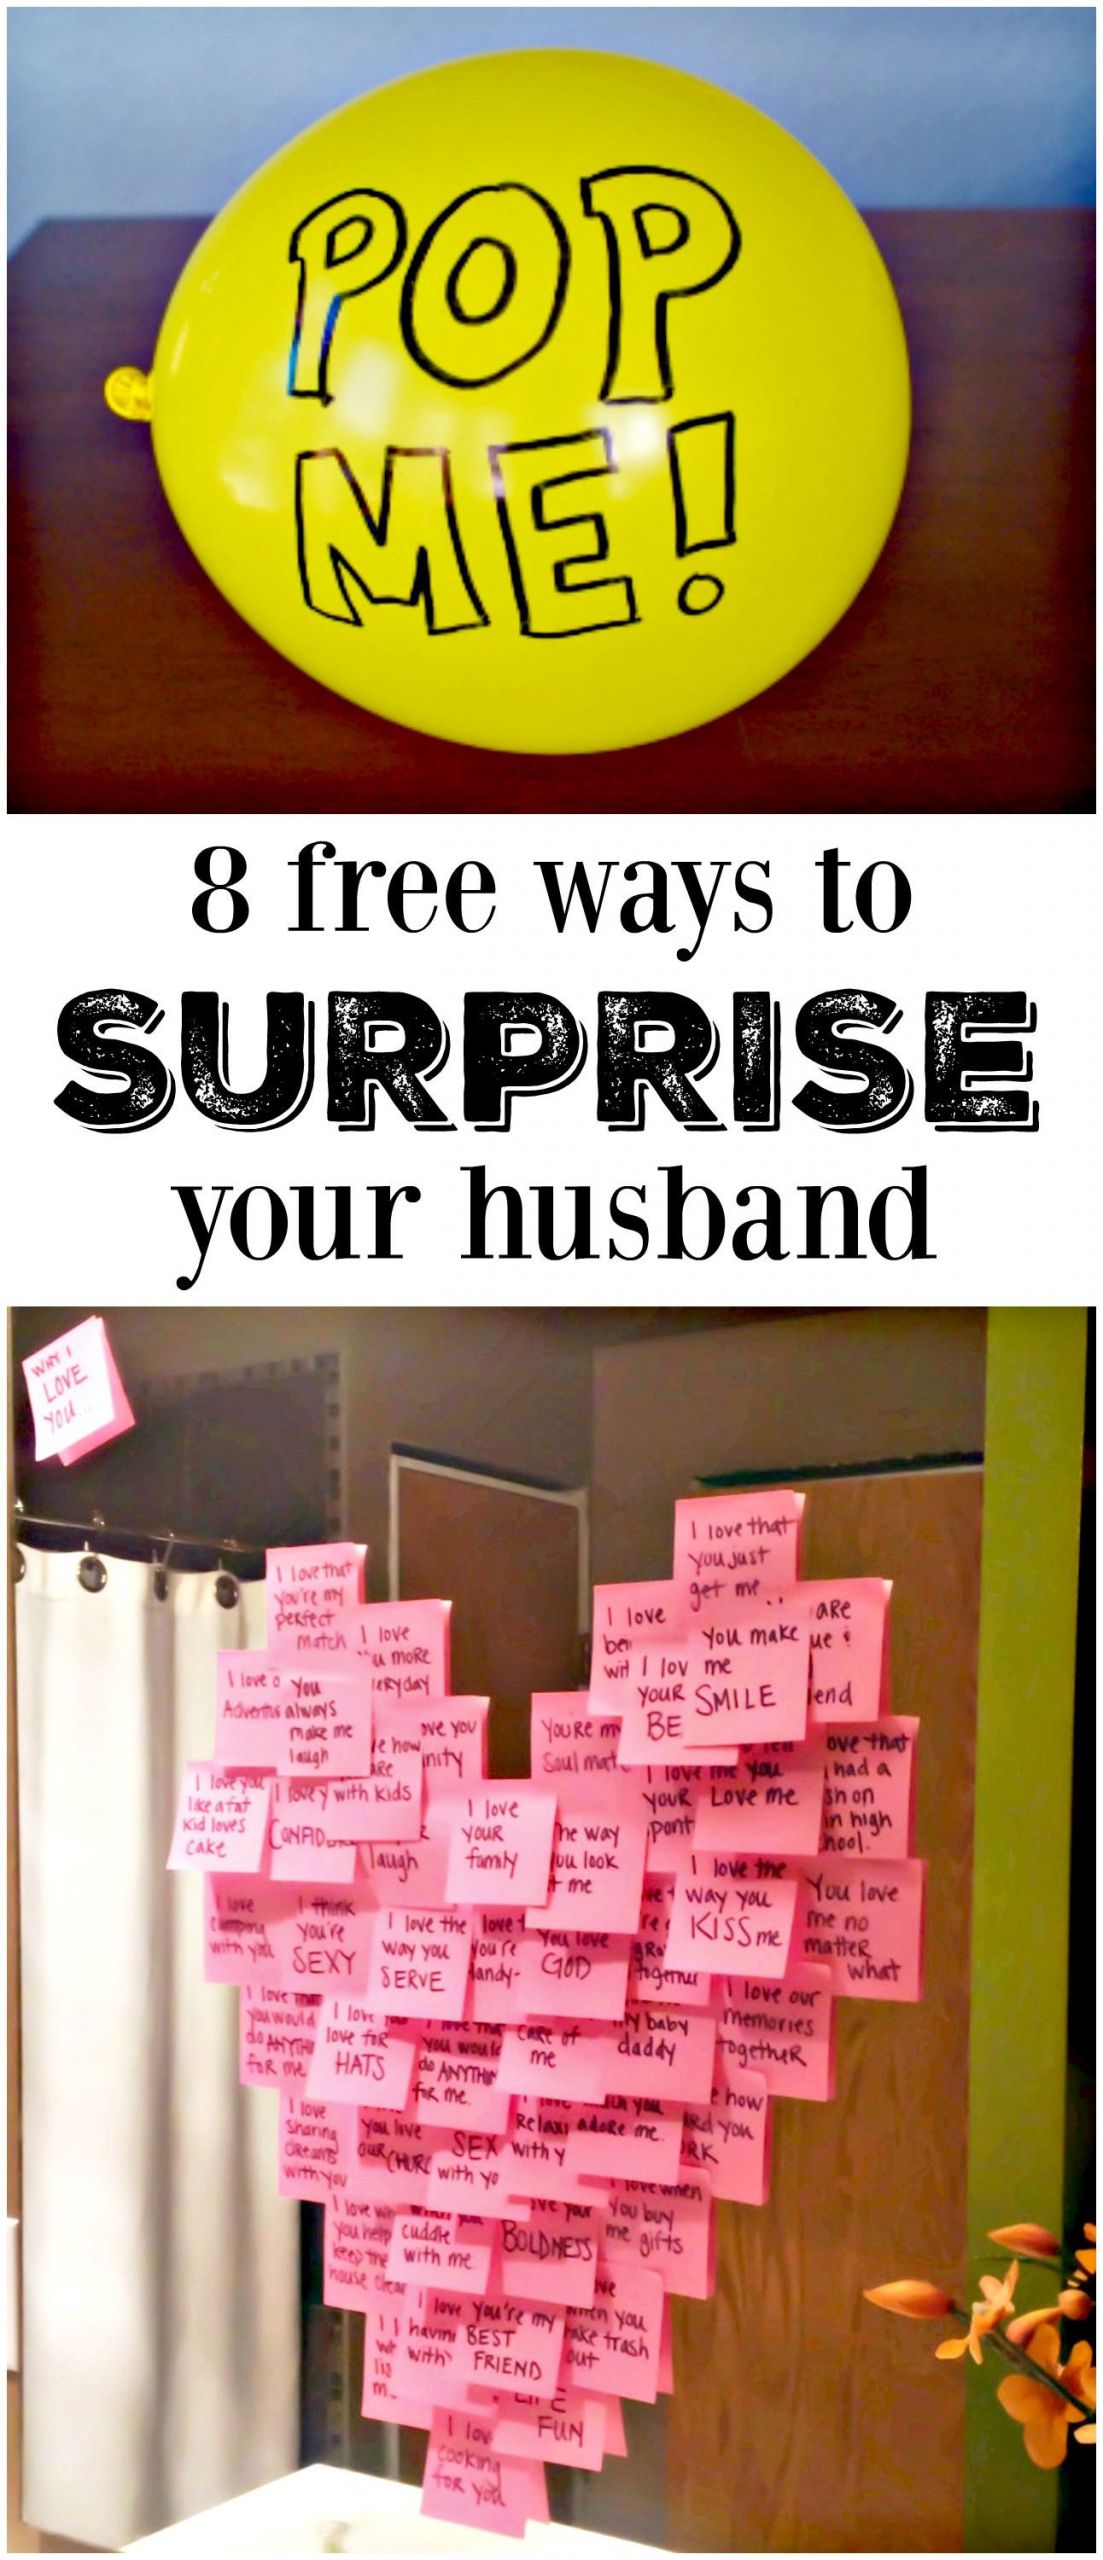 Birthday Gifts For Husband
 8 Meaningful Ways to Make His Day